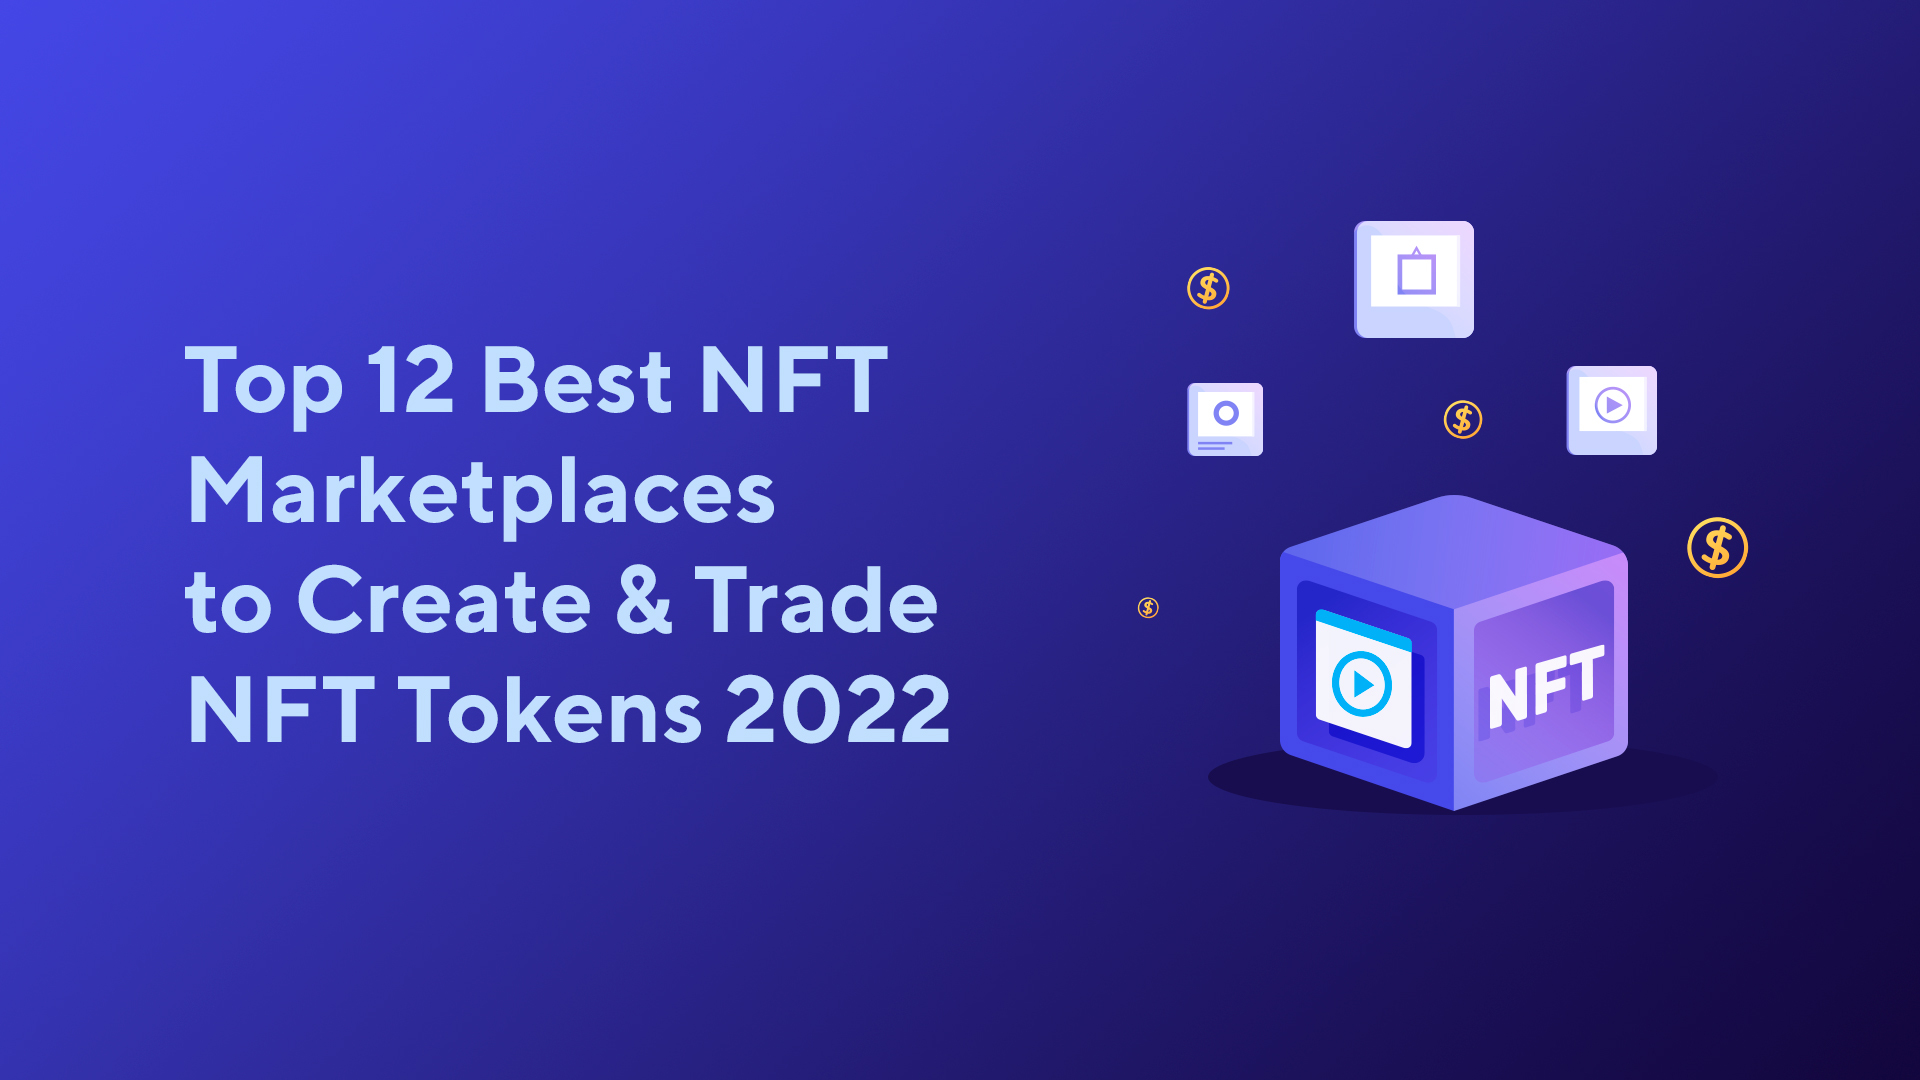 Top 12 Best NFT Marketplaces to Create & Trade NFT Tokens 2022